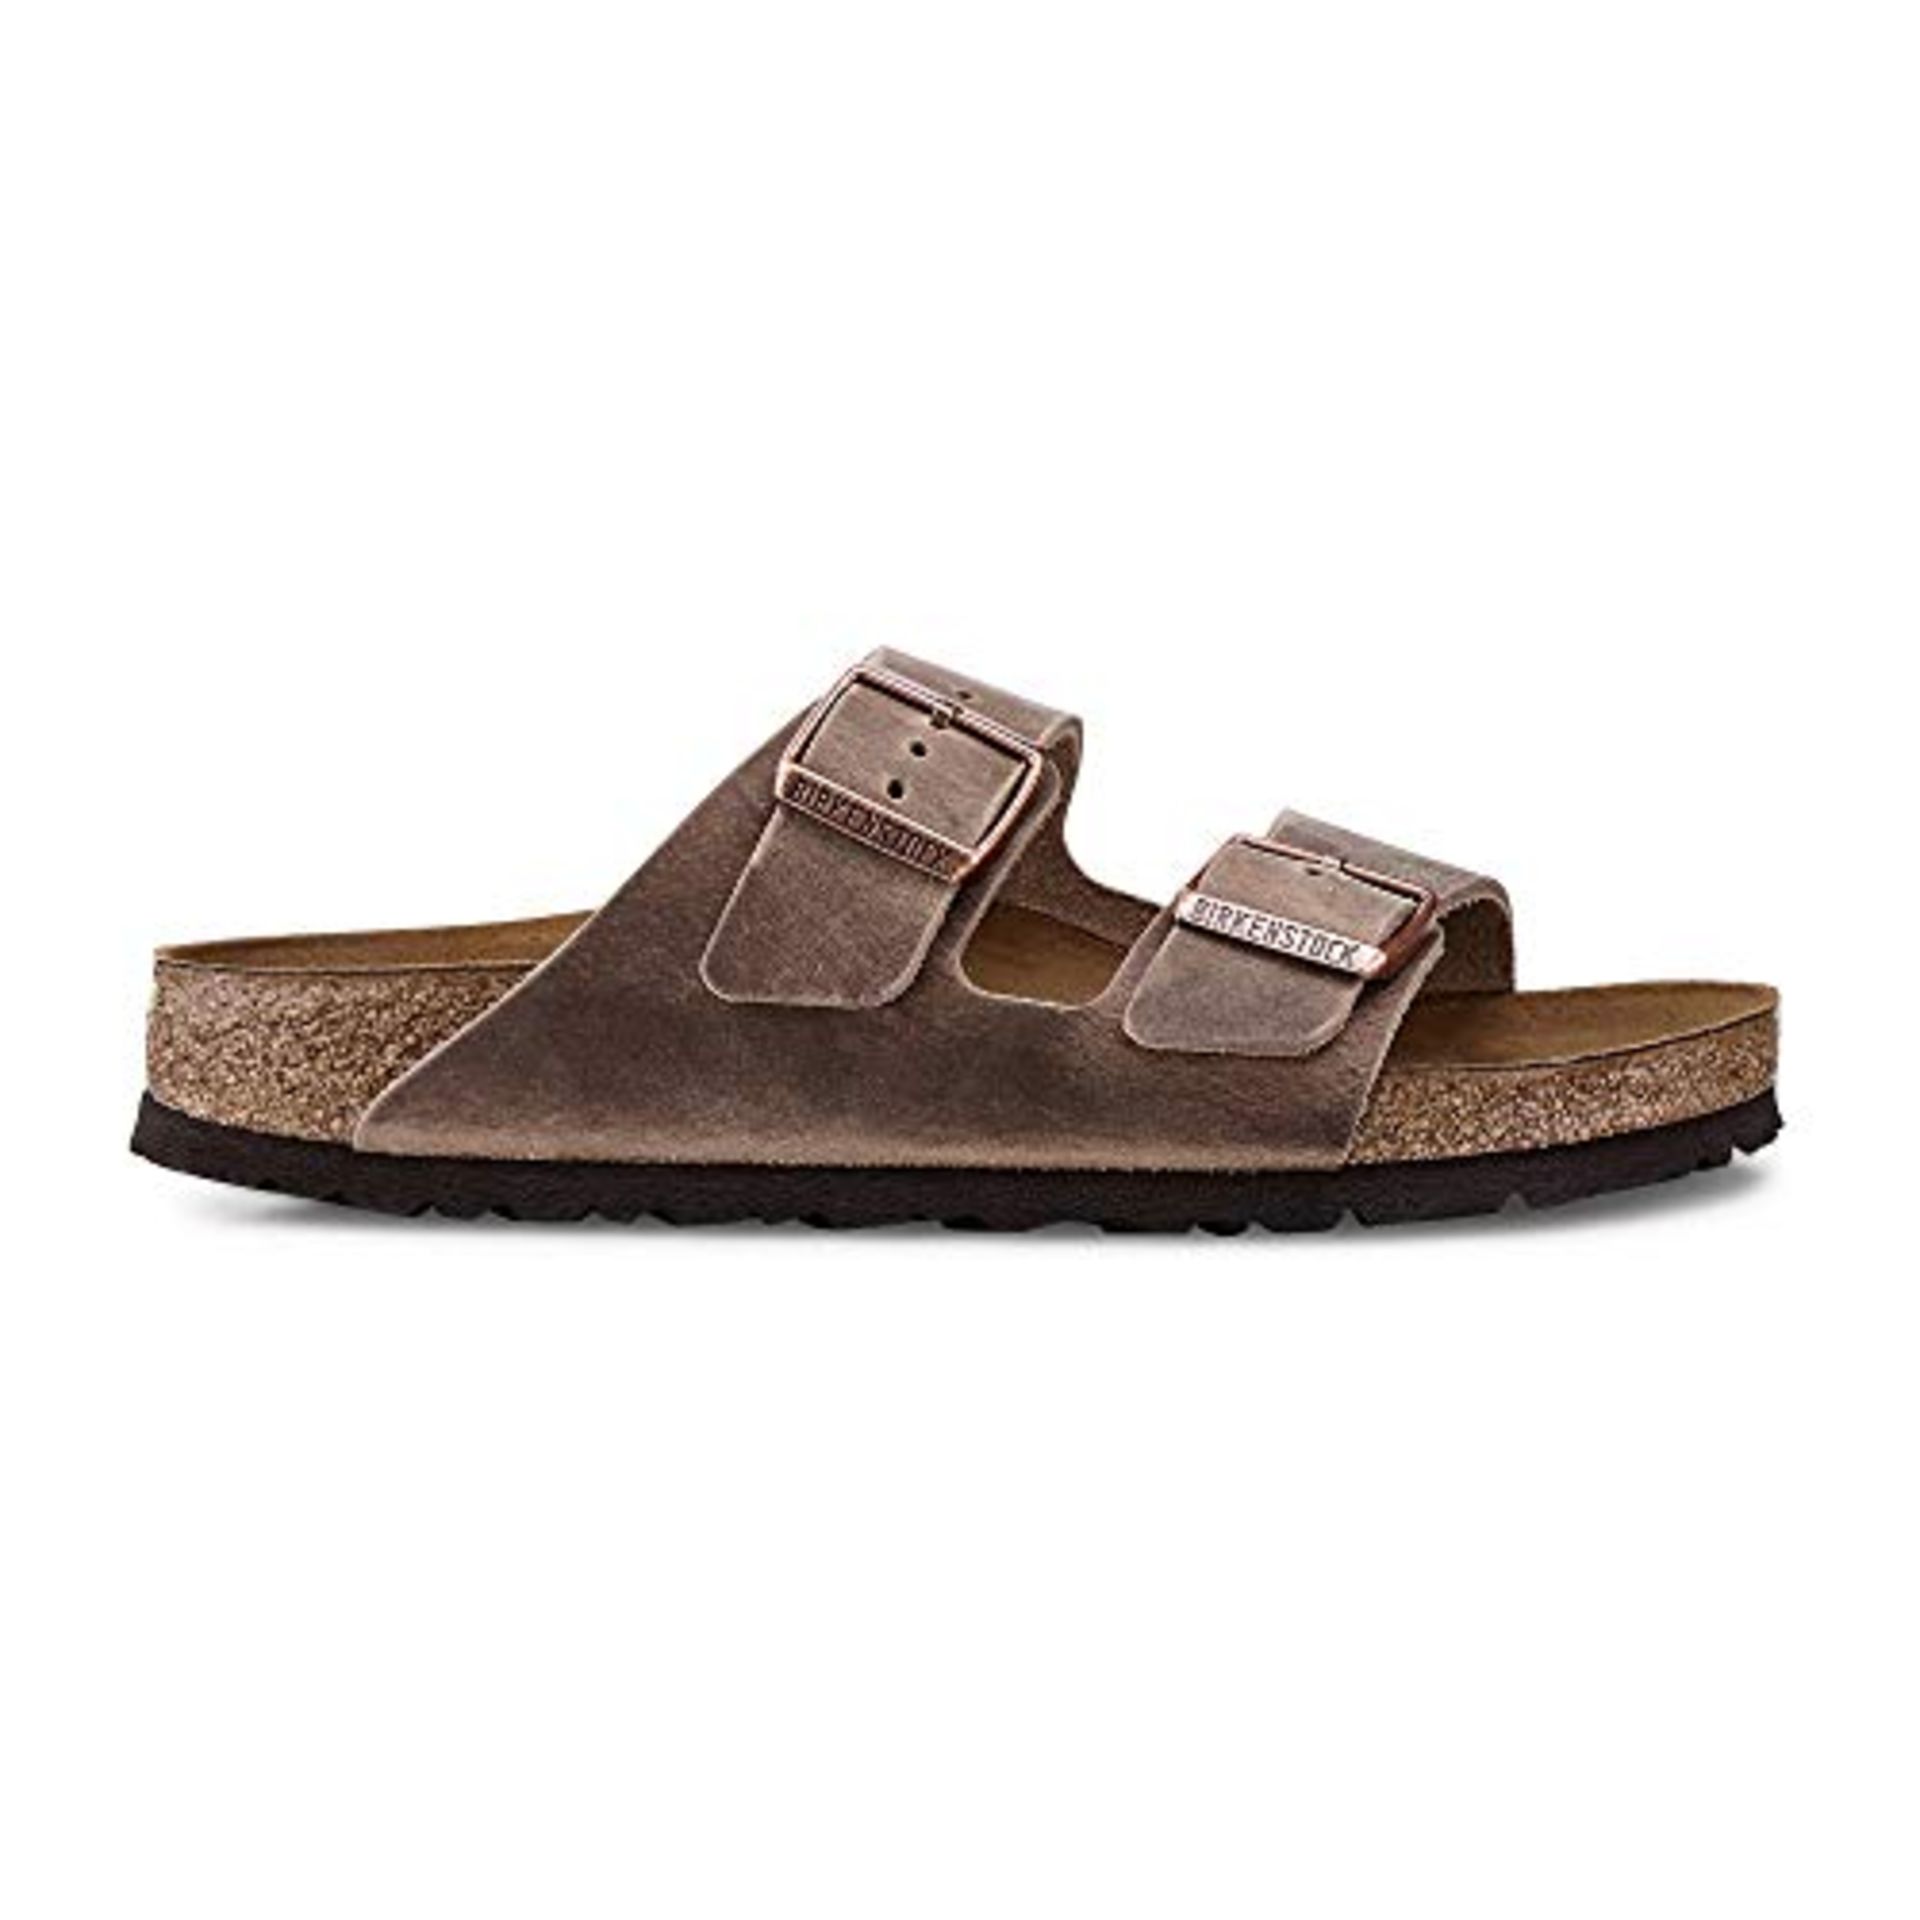 Birkenstock Sandals ''Arizona'' from Leather in Tabacco Brown 41.0 EU N 8 UK Unisex Adults’ 47100001